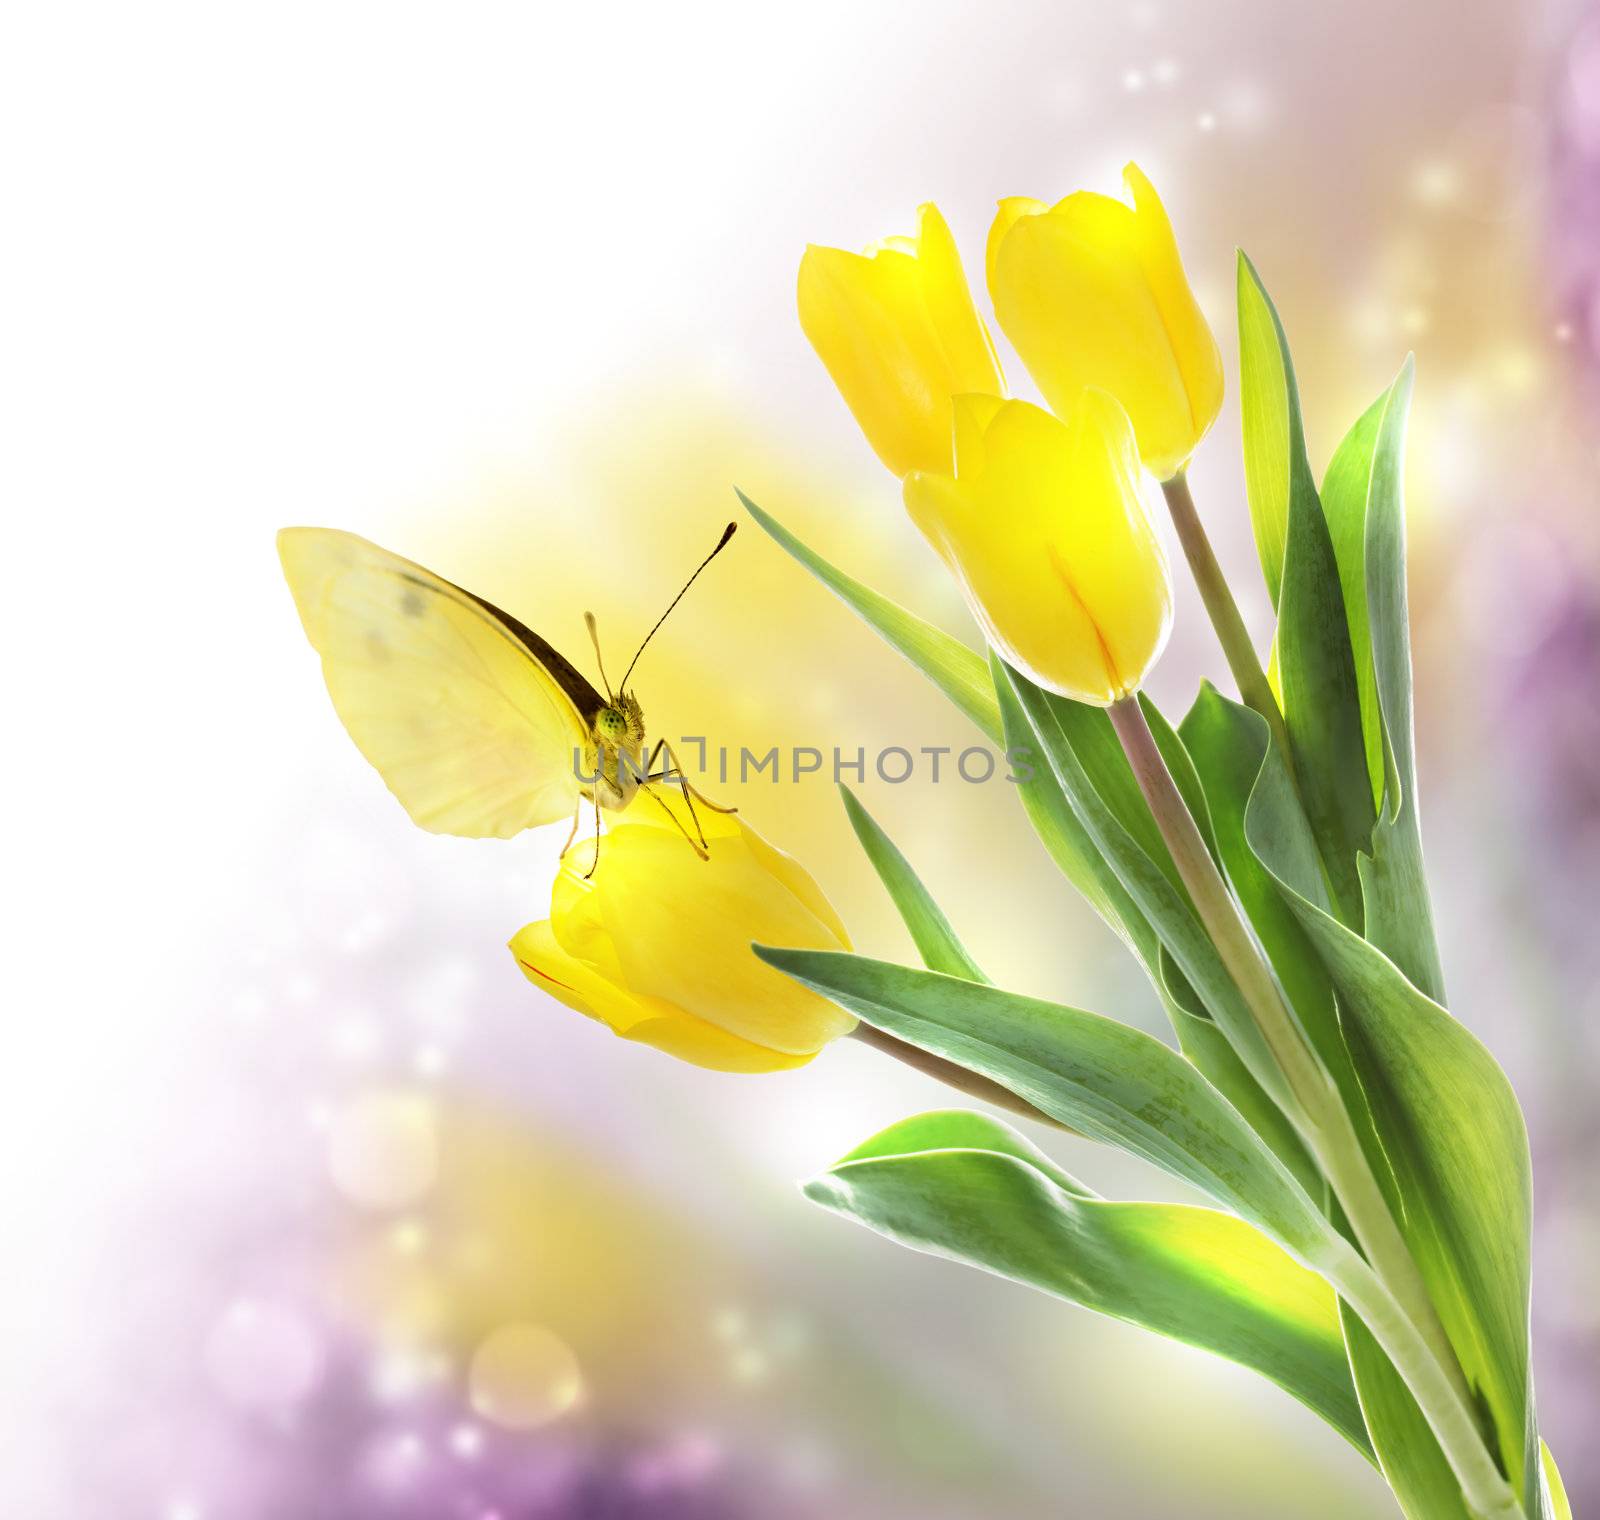 Yellow Tulips with a Butterfly on Lavender Light Background